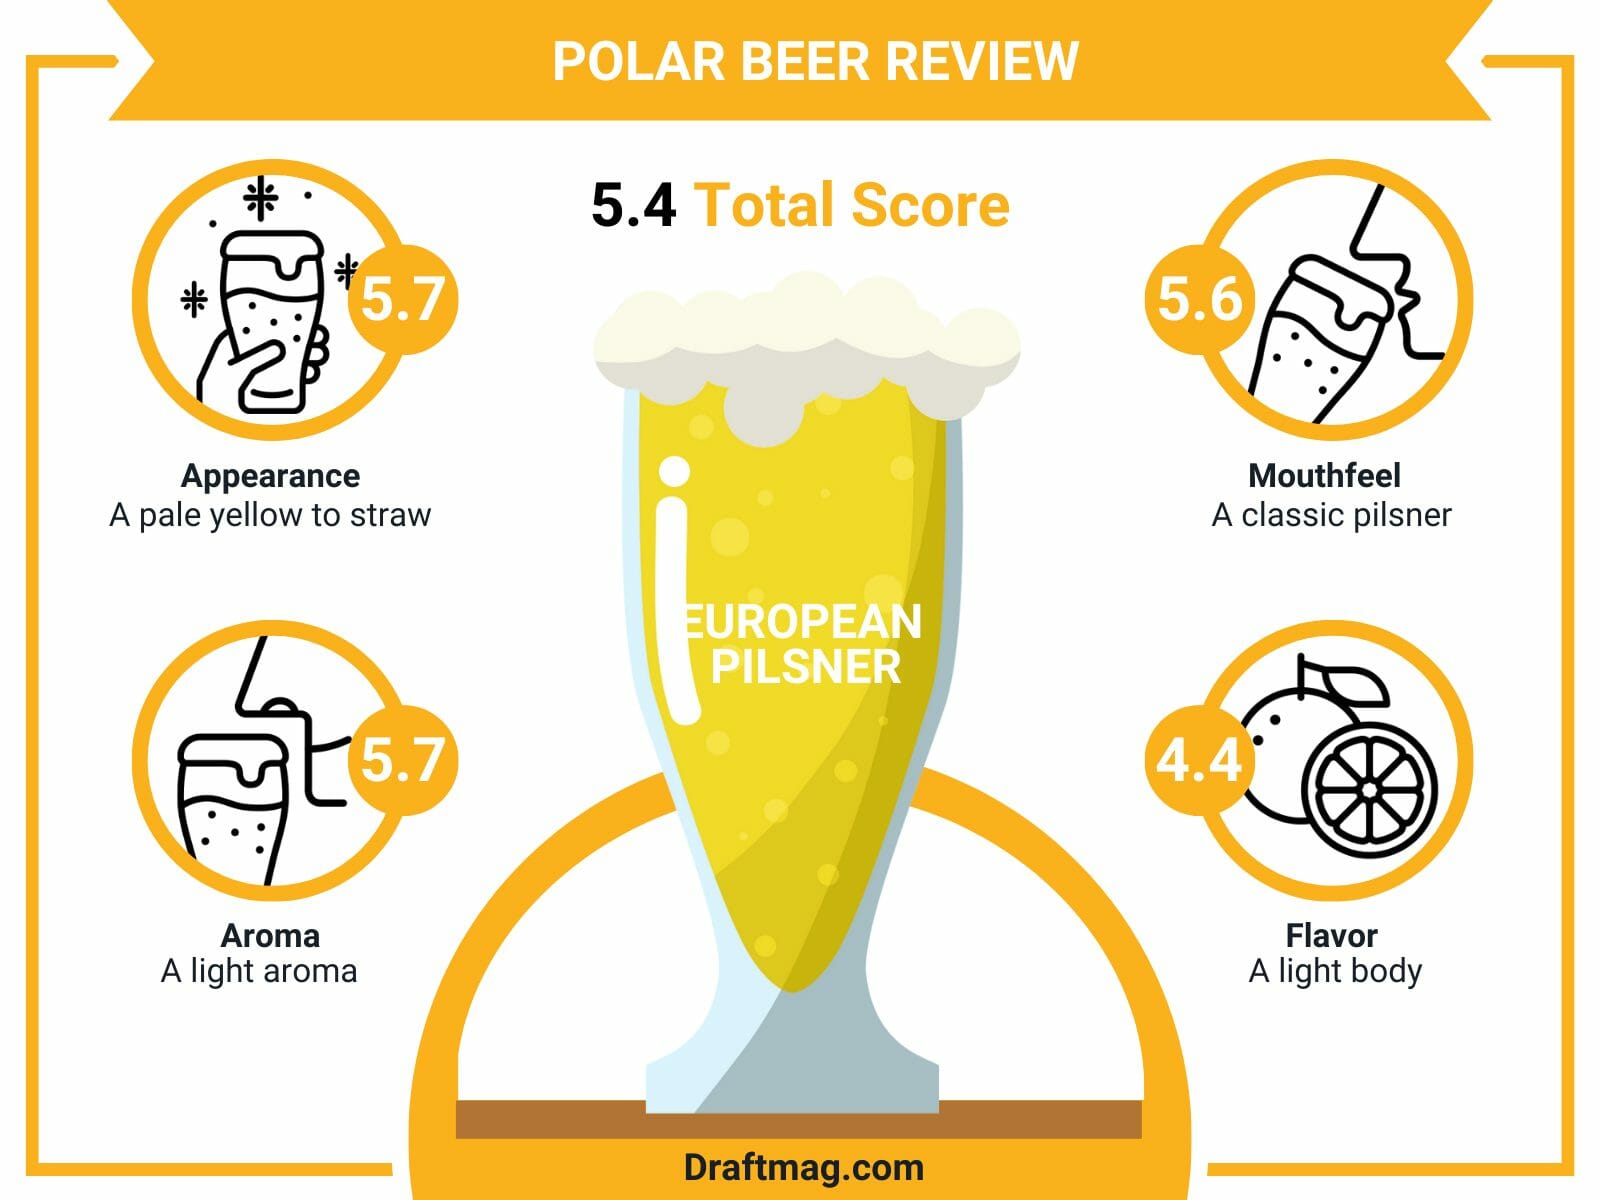 Polar beer review infographic